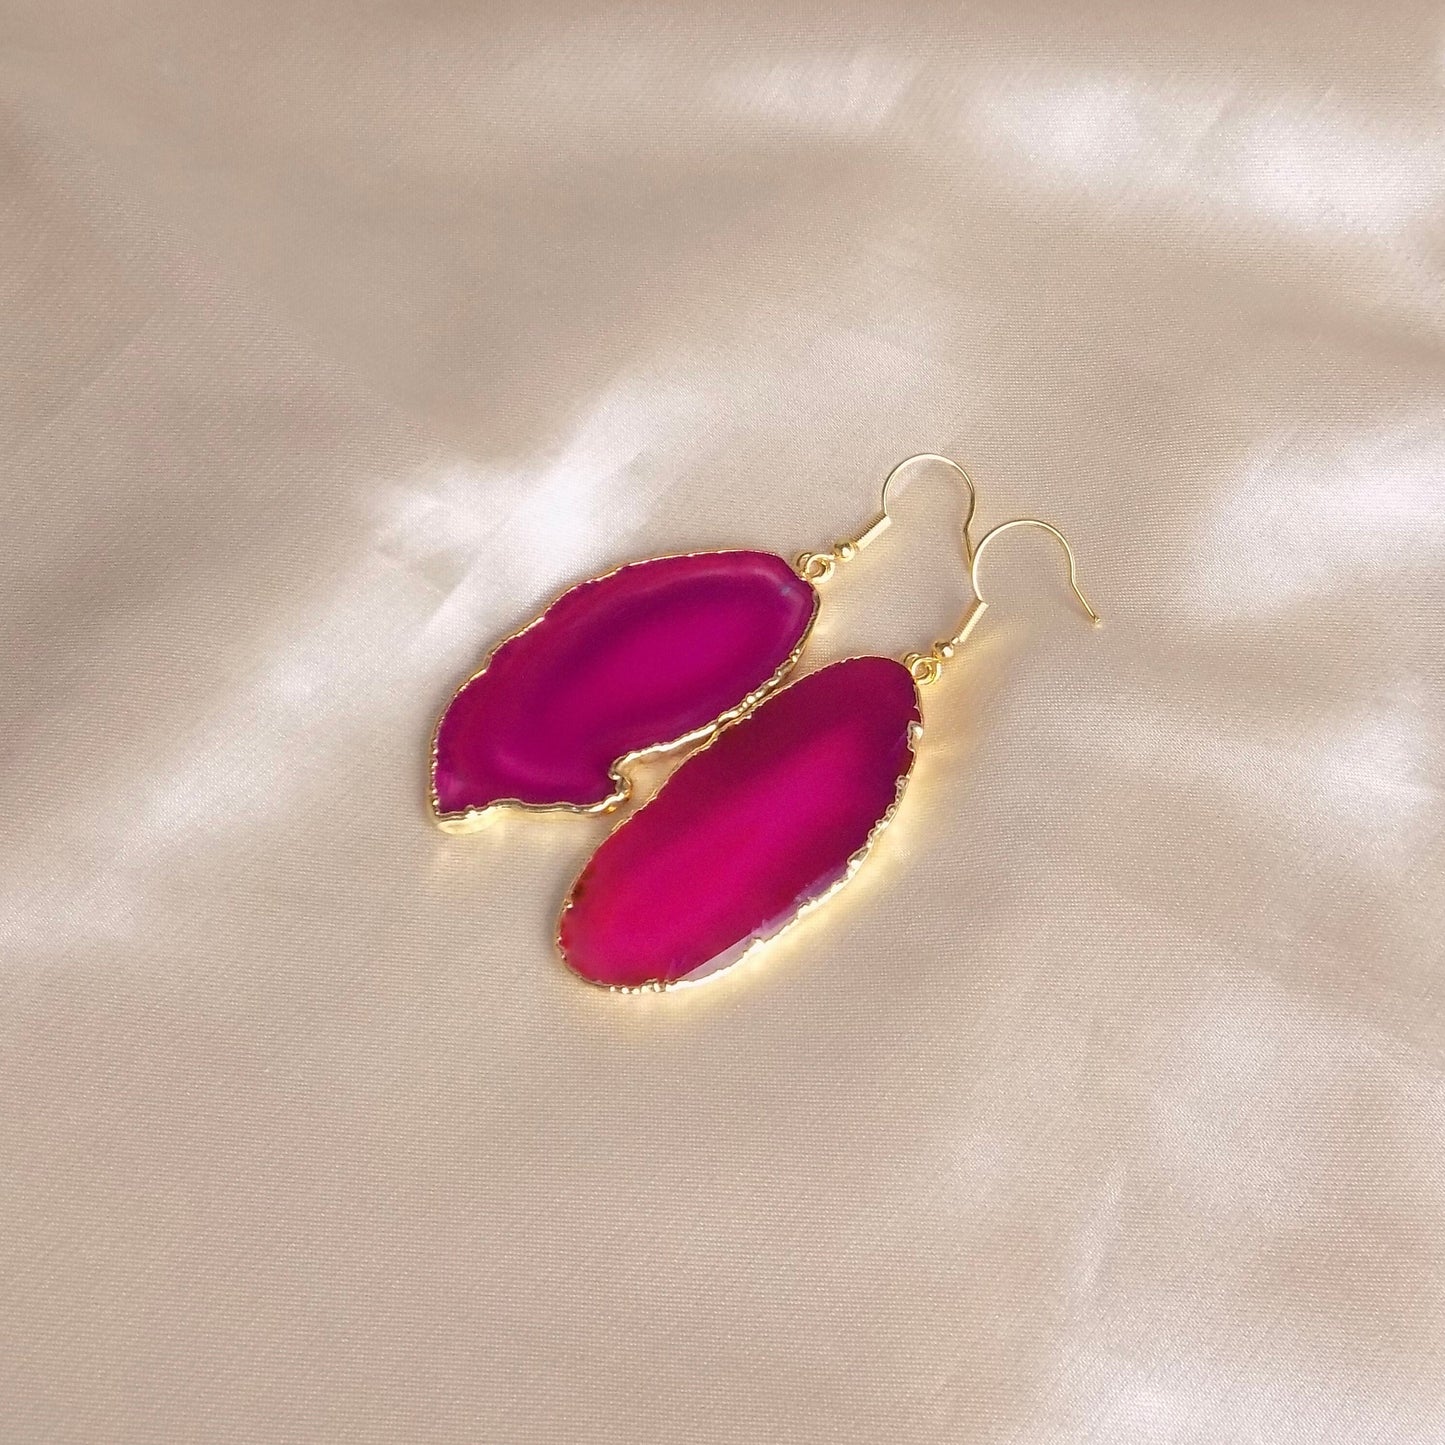 Unique Pink Agate Slice Earrings Gold, Geode Gemstone Earrings Dangle, Gifts For Her, G15-132